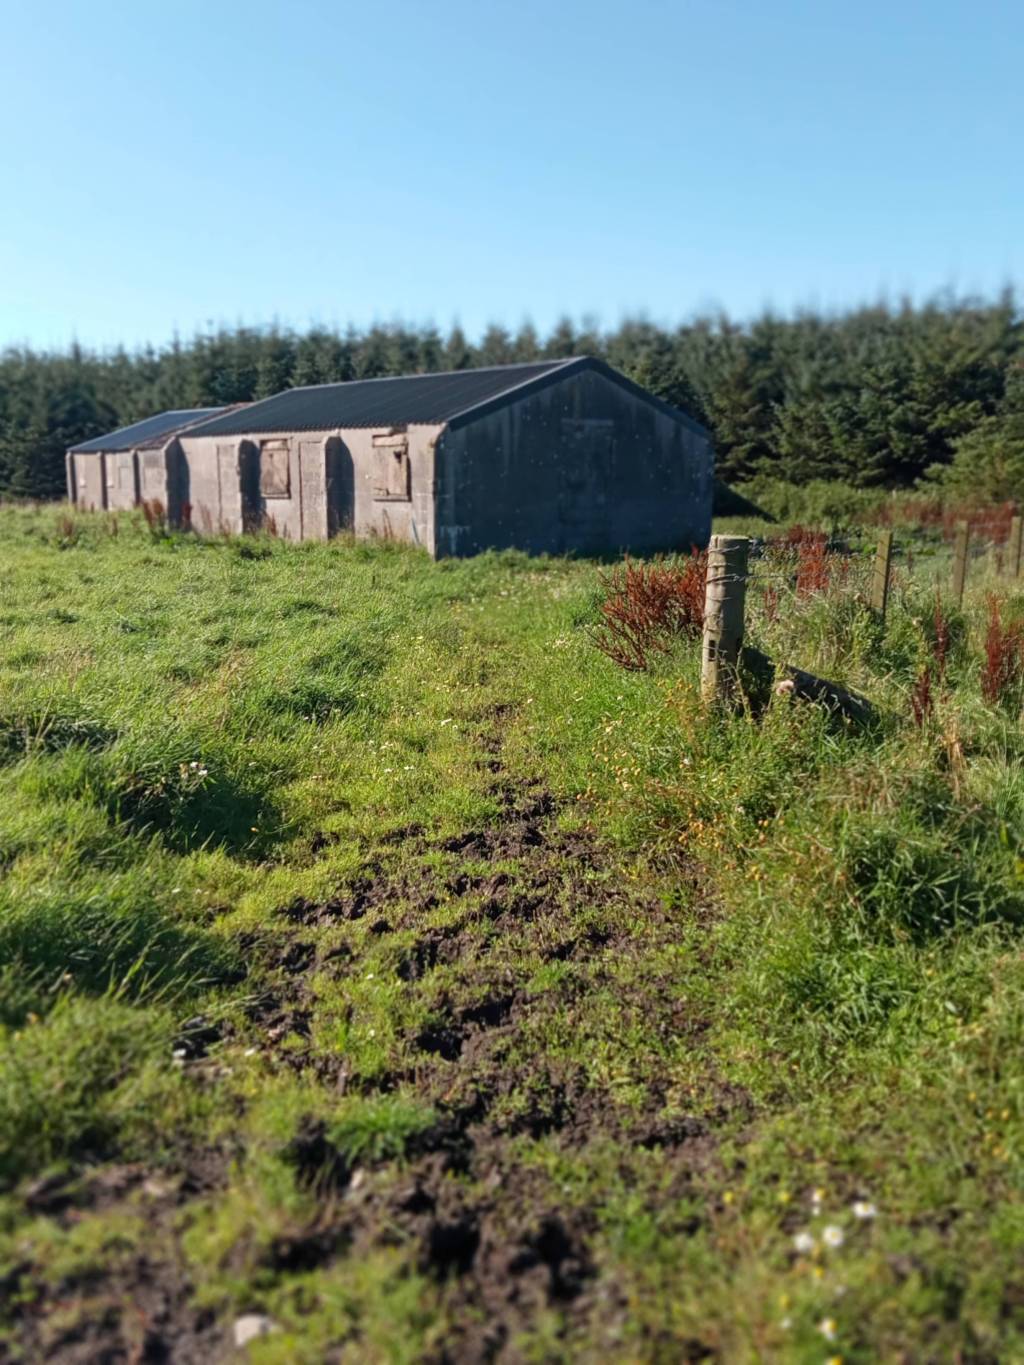 WWII installations on the Moray Firth Trail